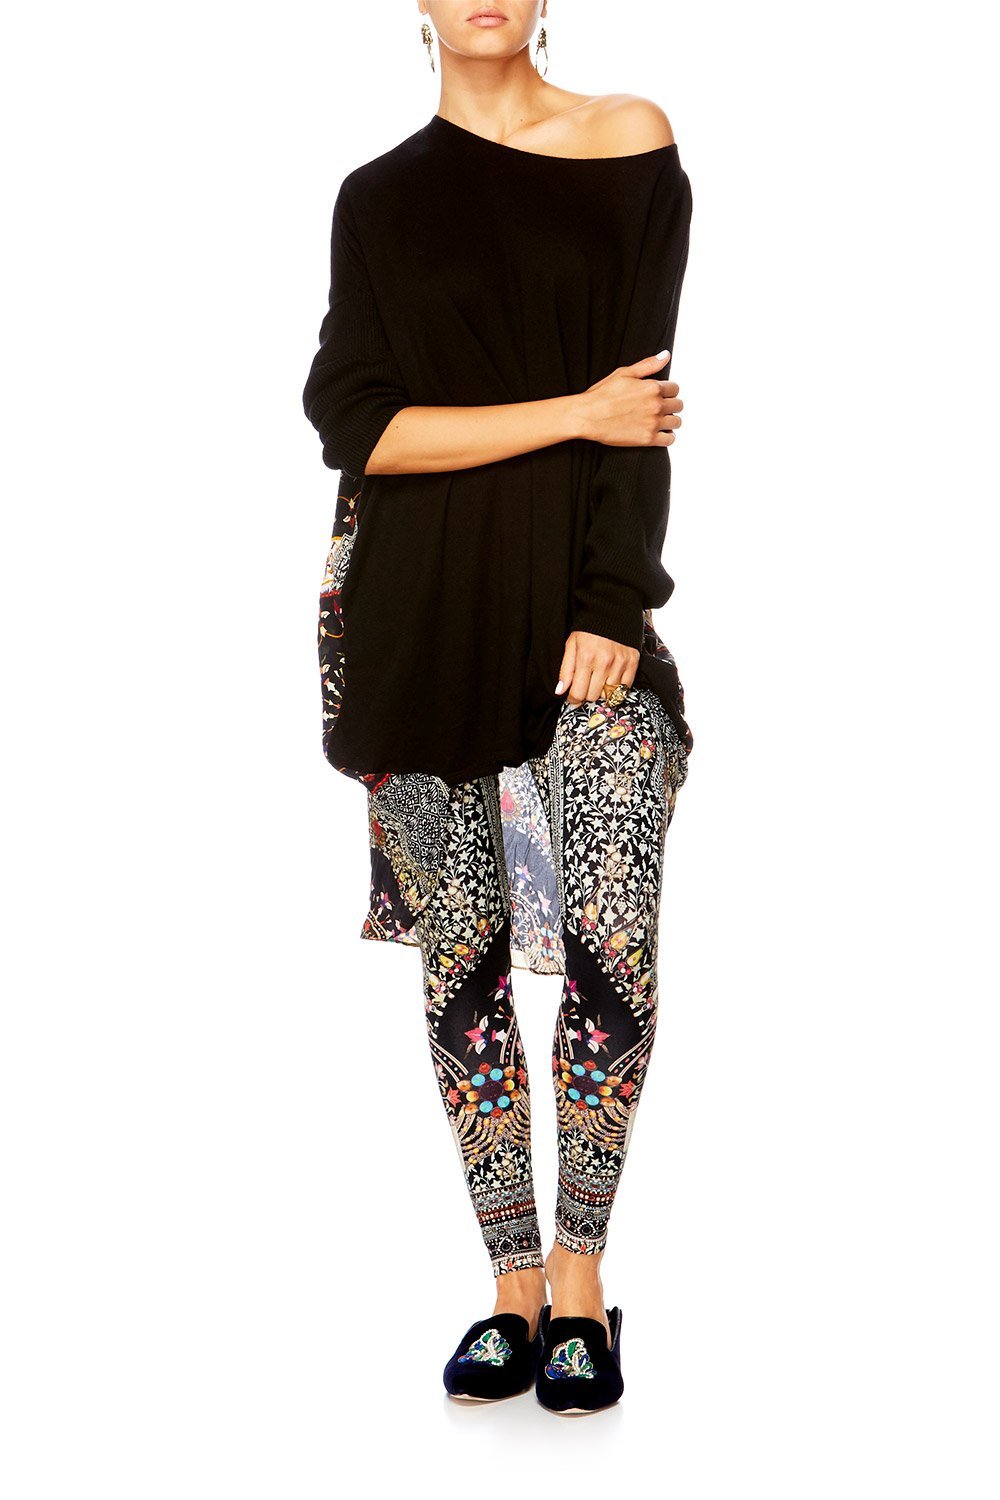 CHAMBER OF REFLECTIONS LONG SLEEVE JUMPER W PRINTED BACK